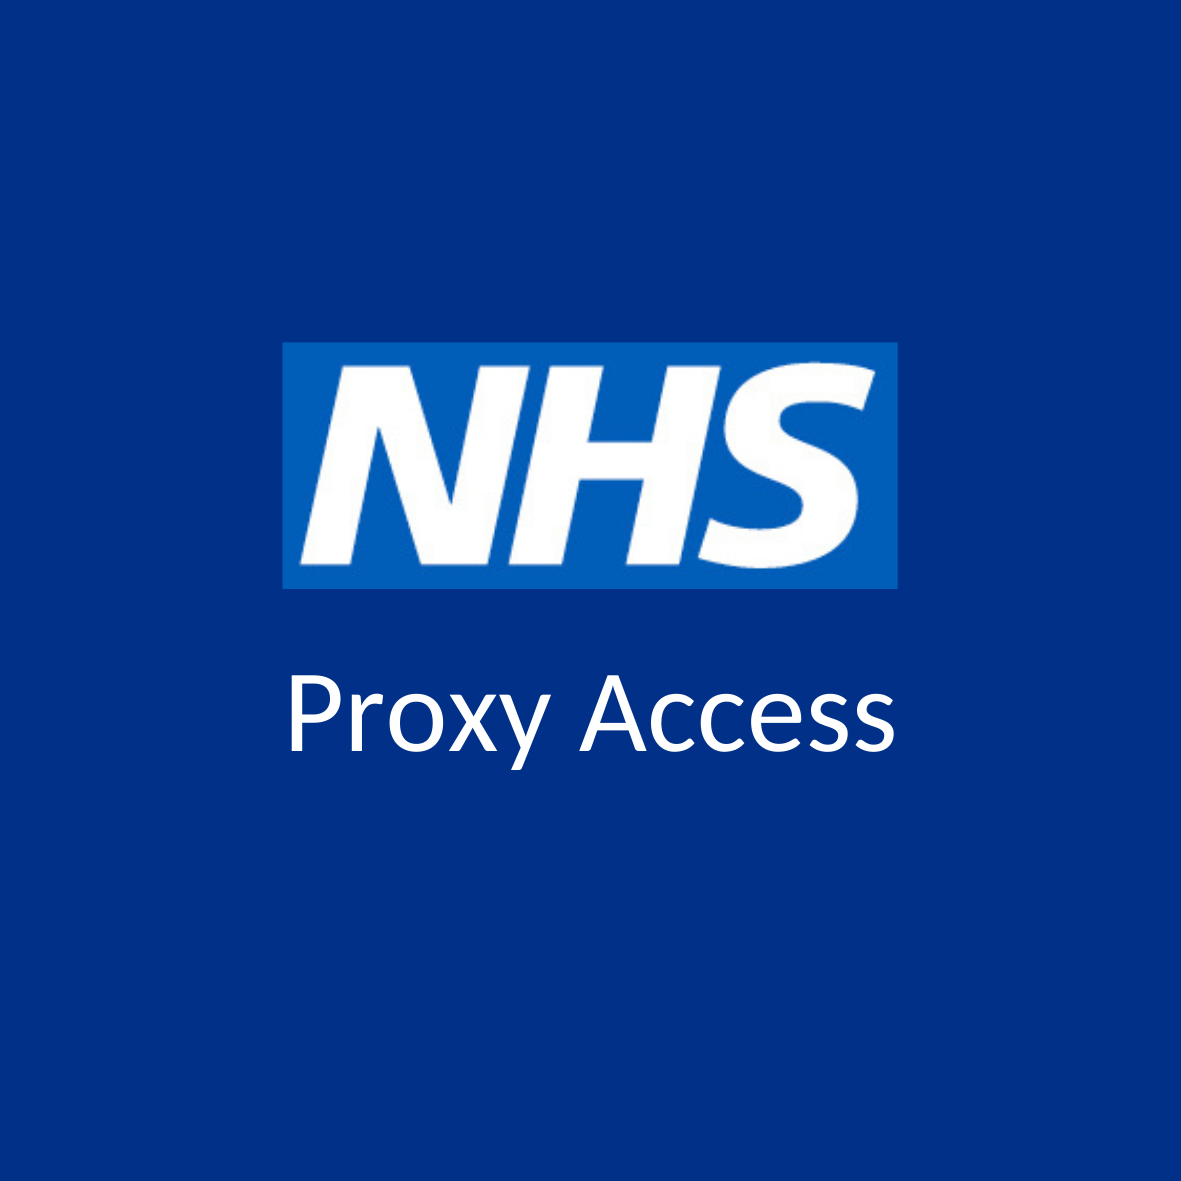 NHS Logo With Words 'Proxy Access'